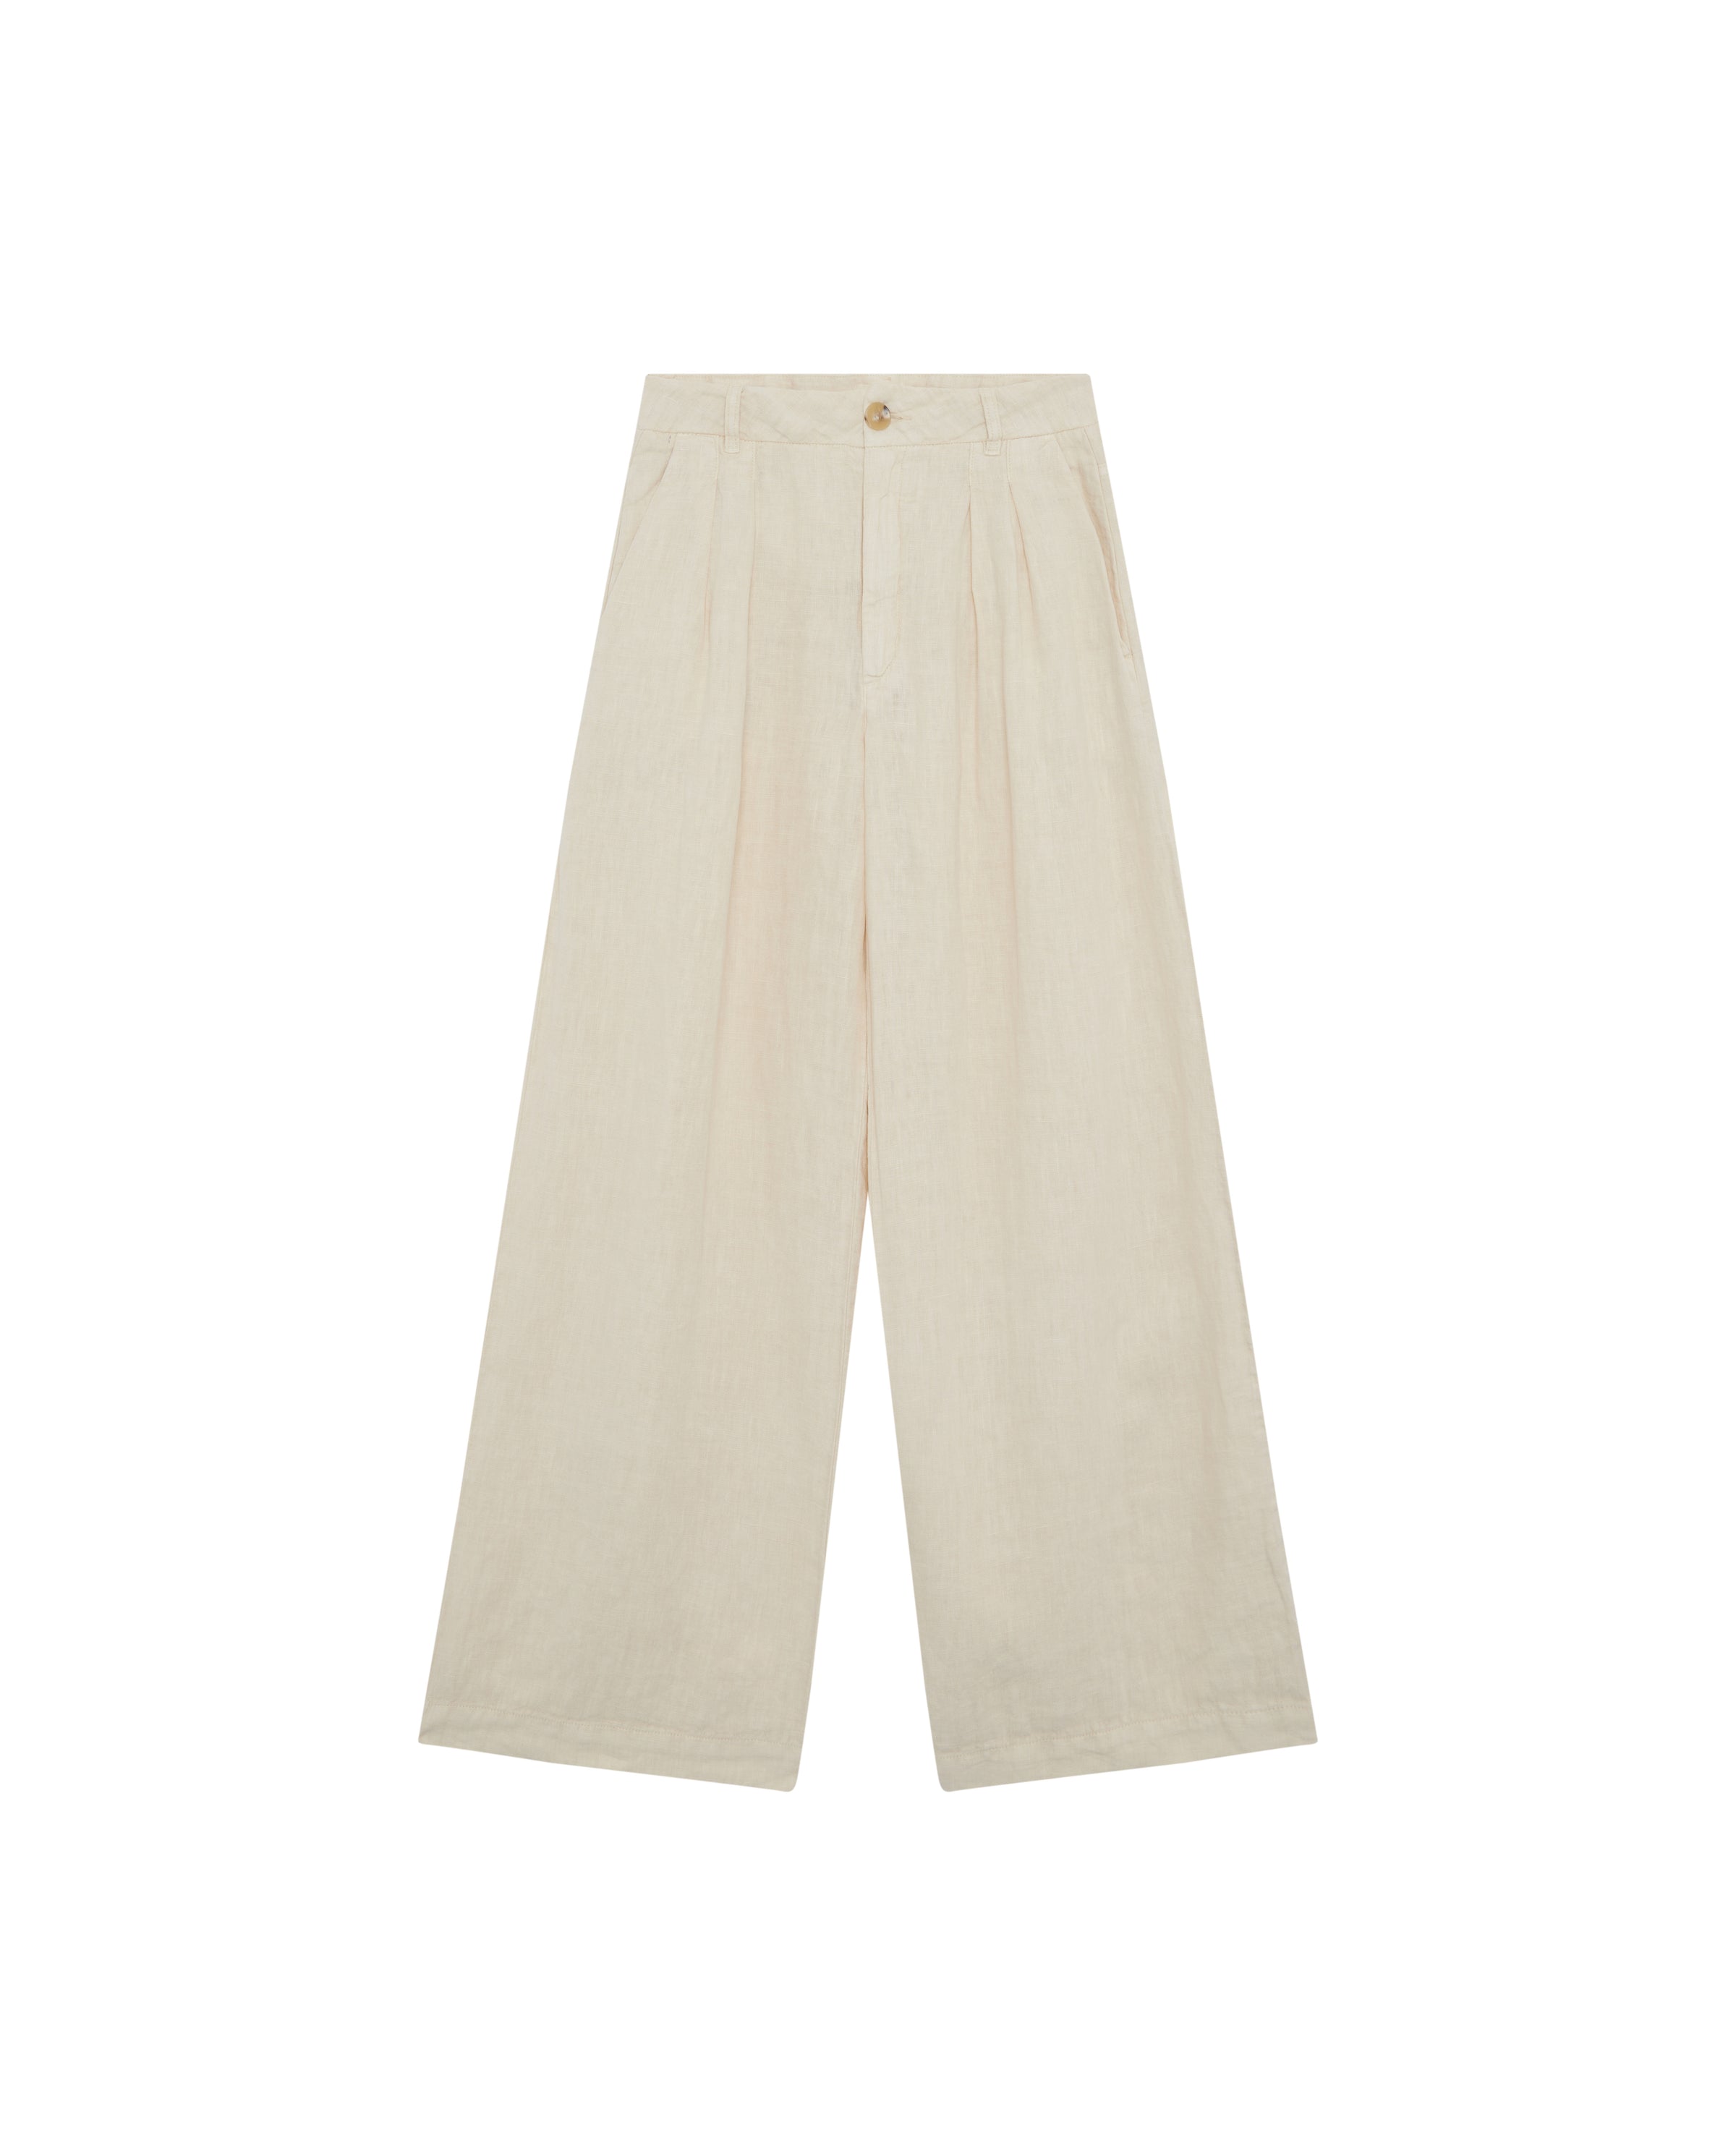 Ecru wide leg linen trousers with pleated front zip fly and button fastening